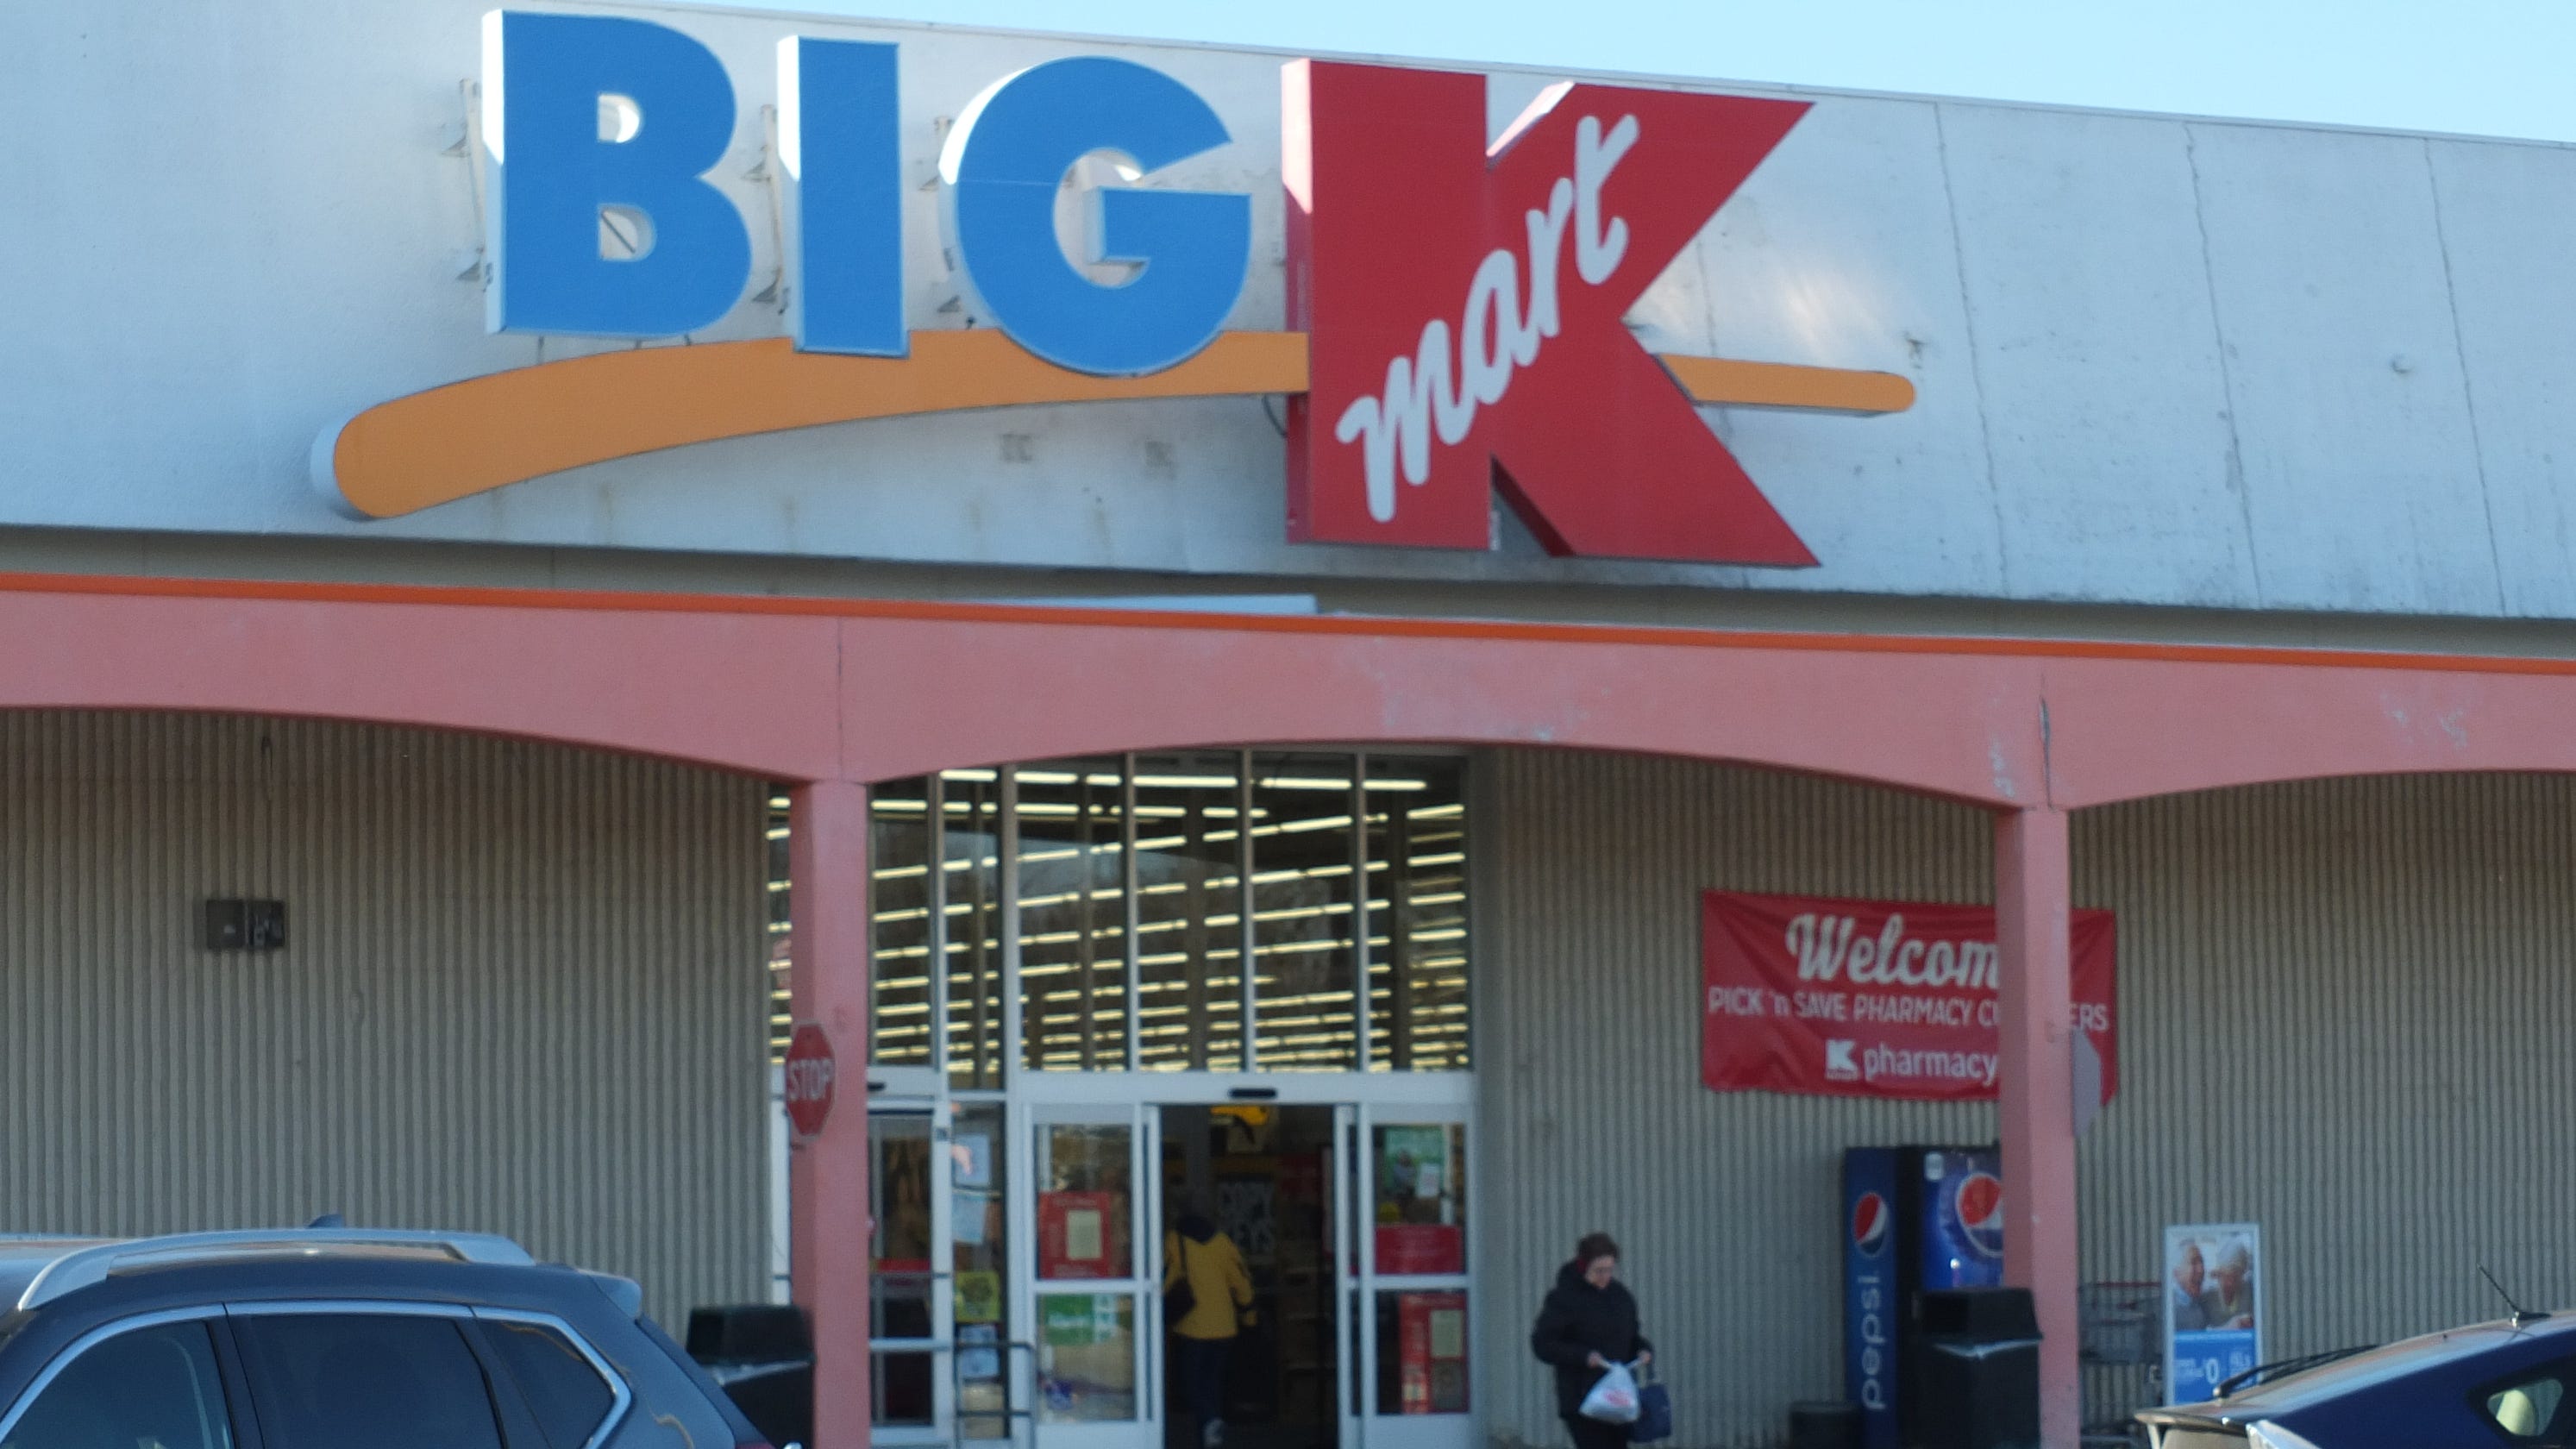 U Haul Plan For Retail Storage Center At Former Cudahy Kmart Rejected